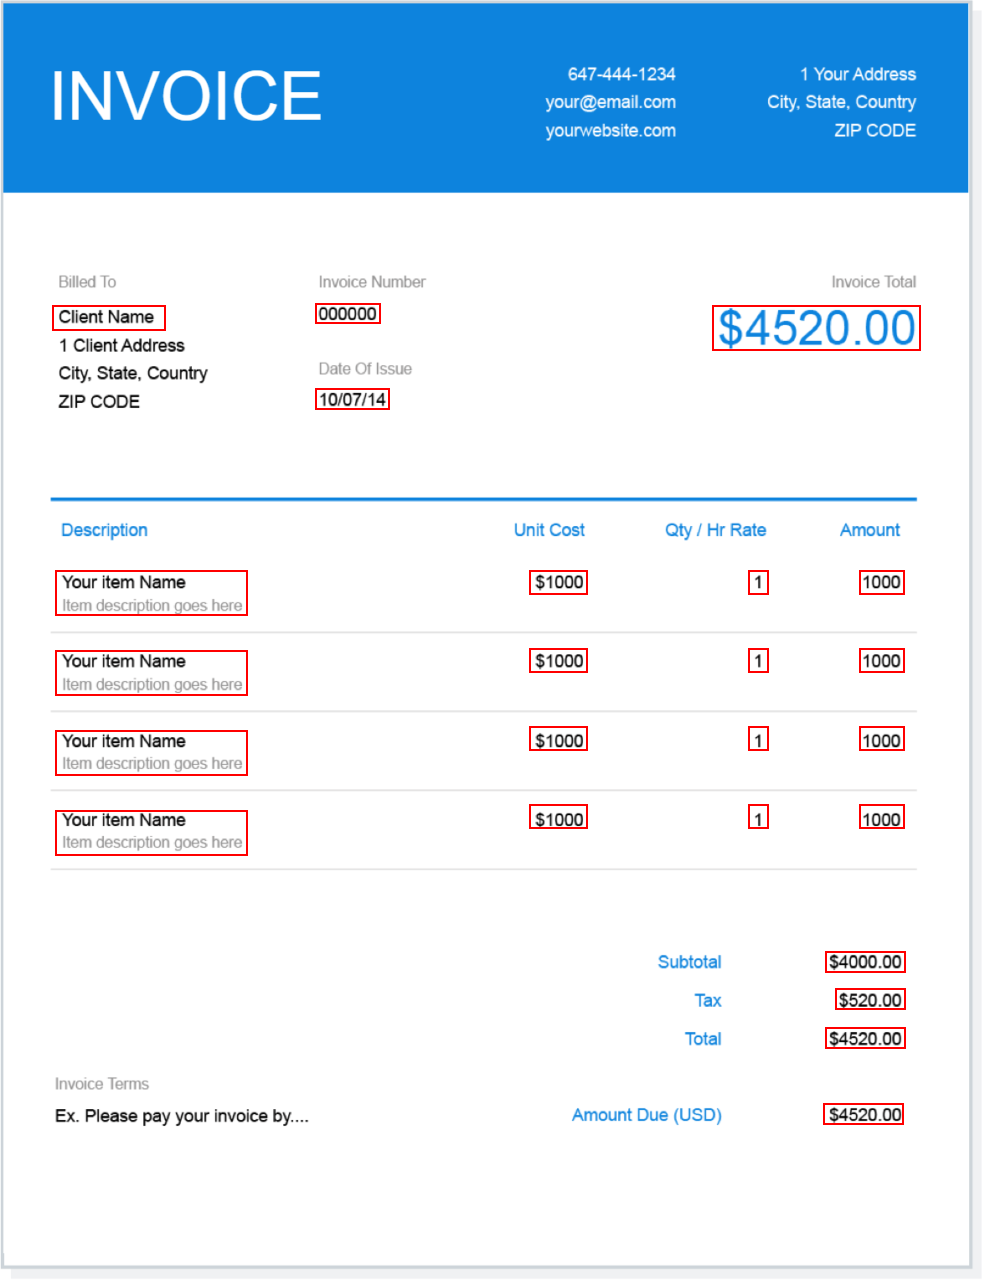 annotated invoice document for RPA